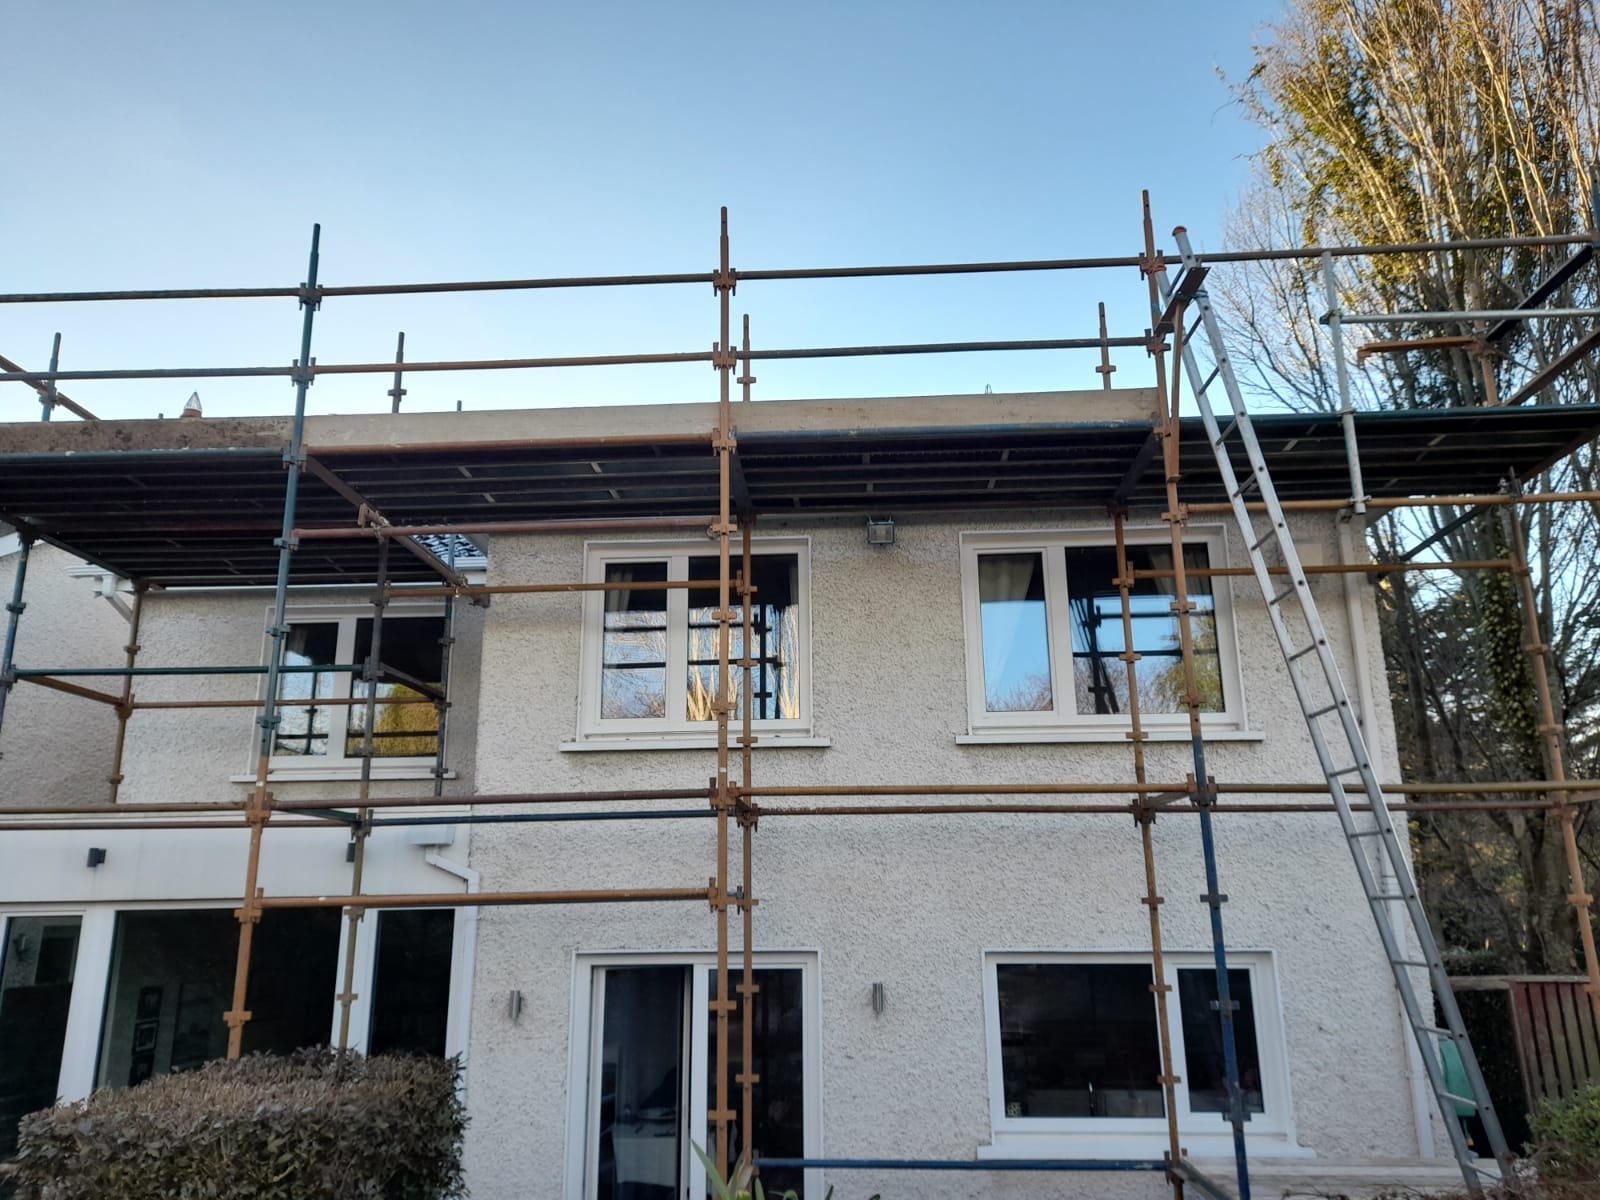 images/Photos/12-new-roof-installation-cabinteely-back-1.jpg